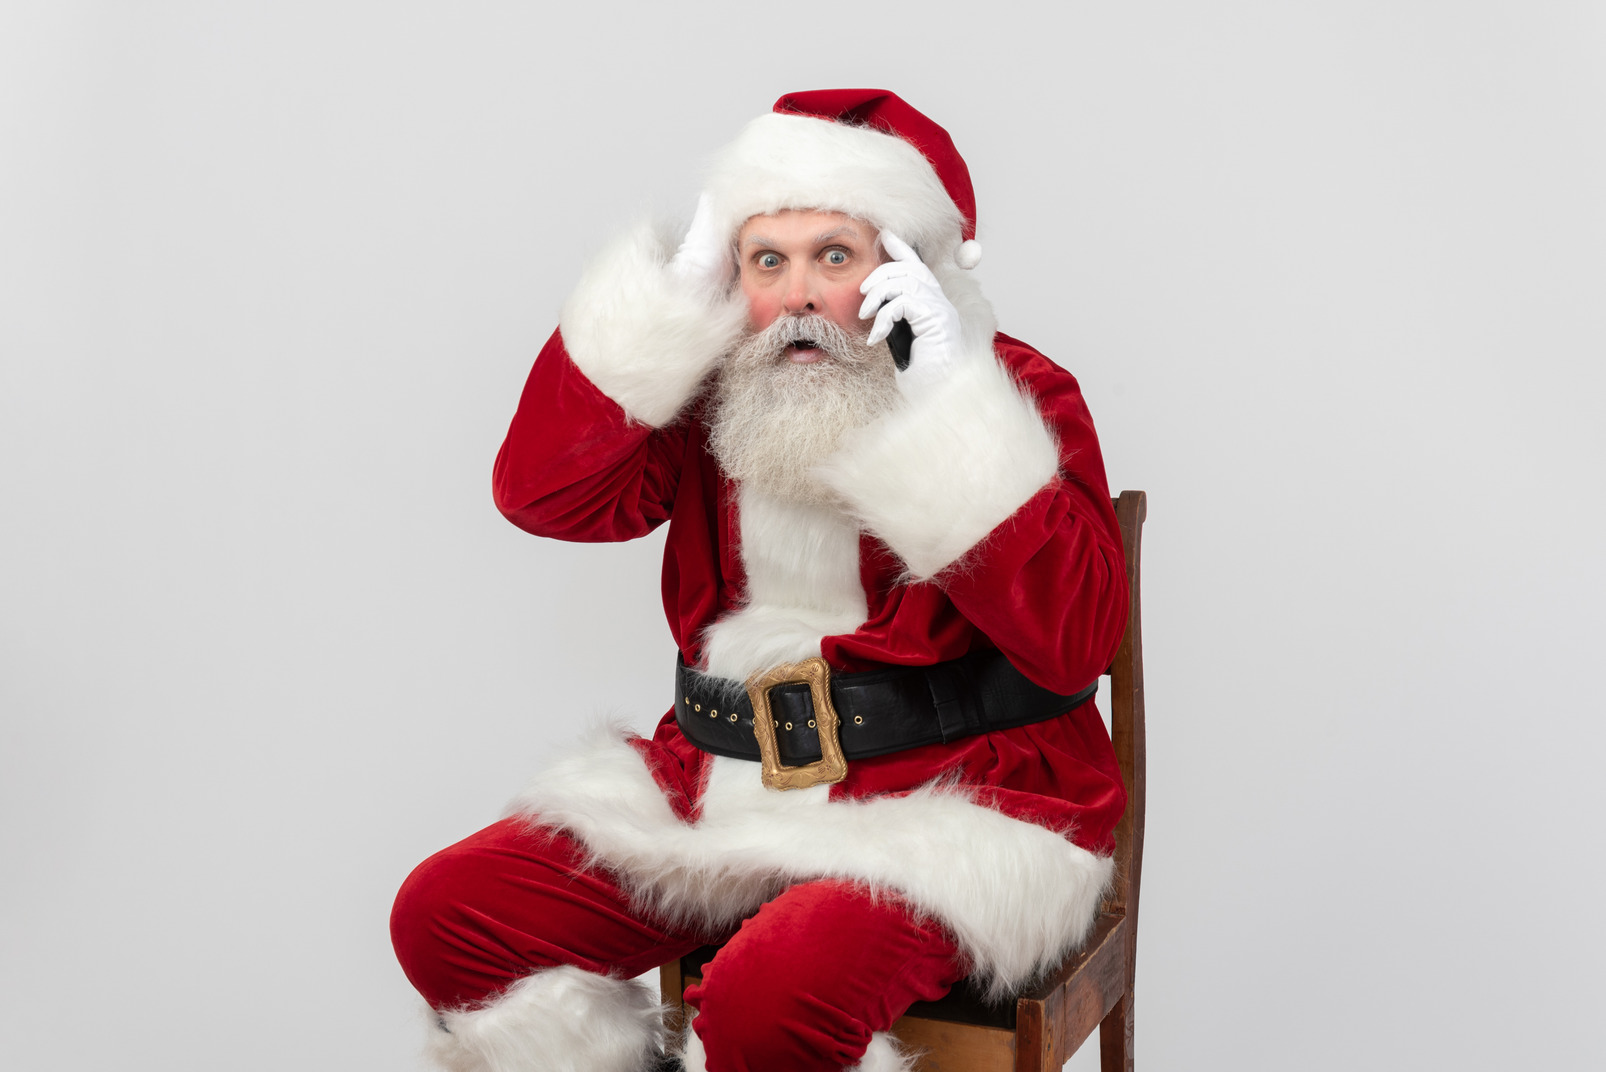 Santa claus talking on the phone and looking quite surprised